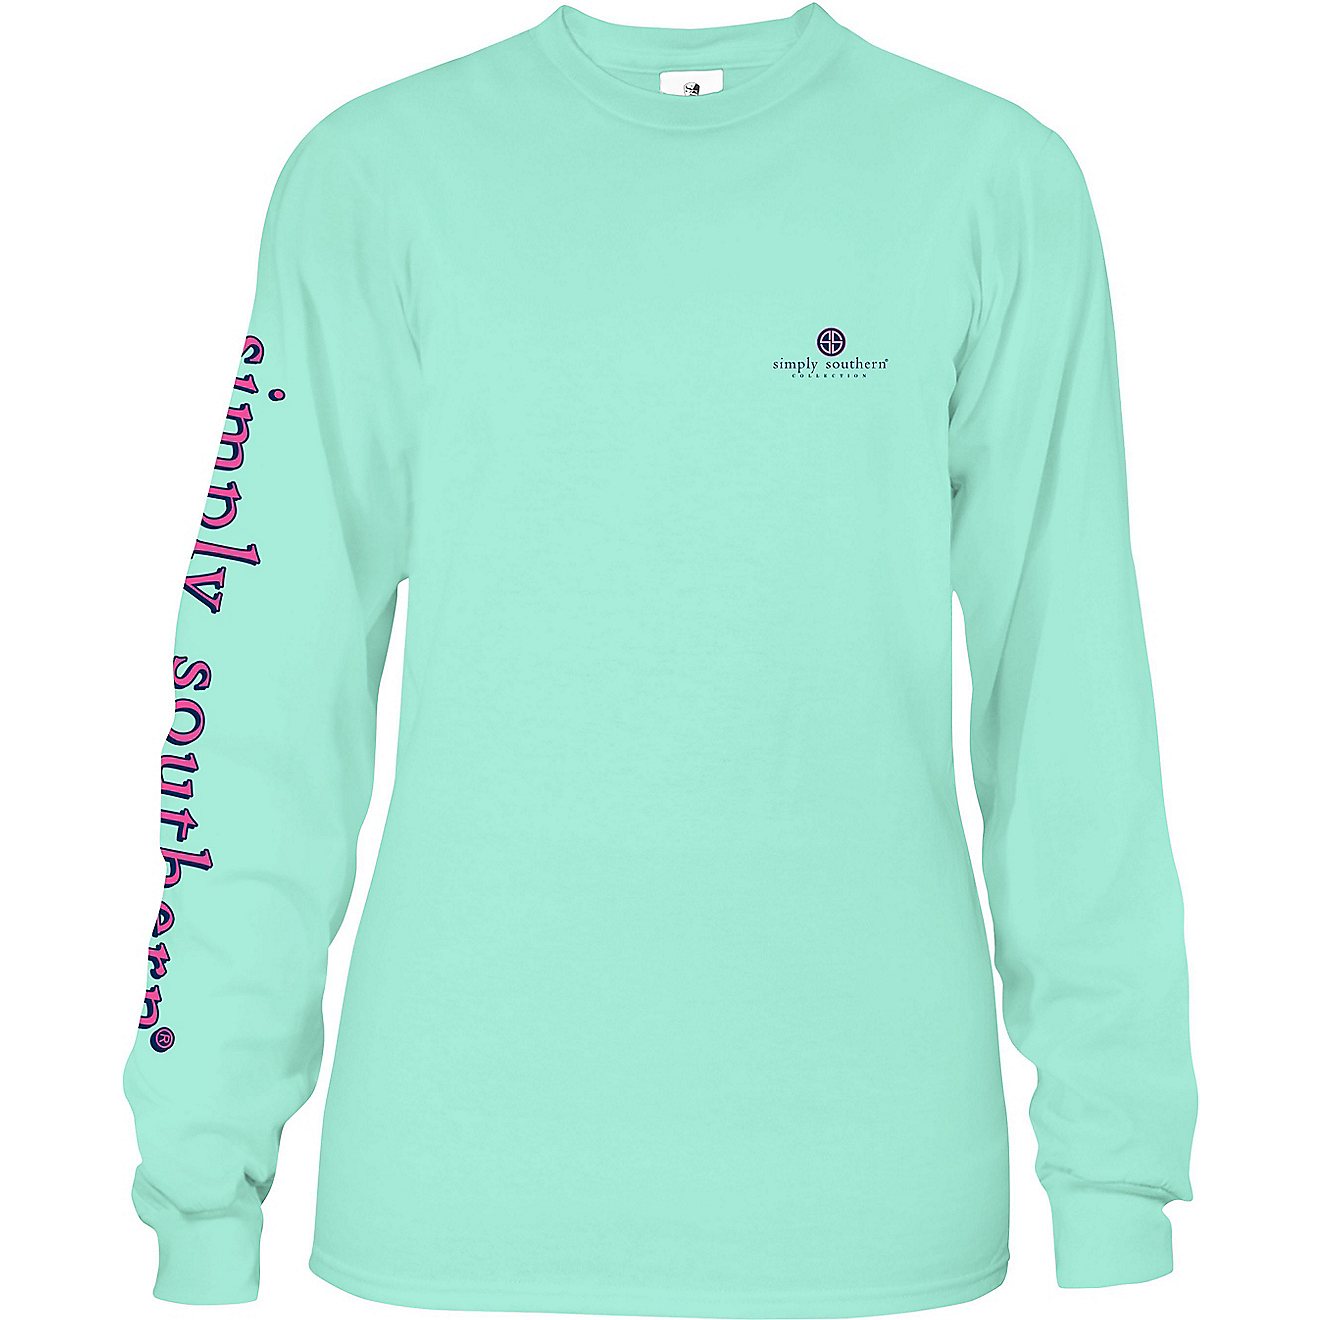 Simply Southern Girls’ Long Sleeve T-shirt | Academy